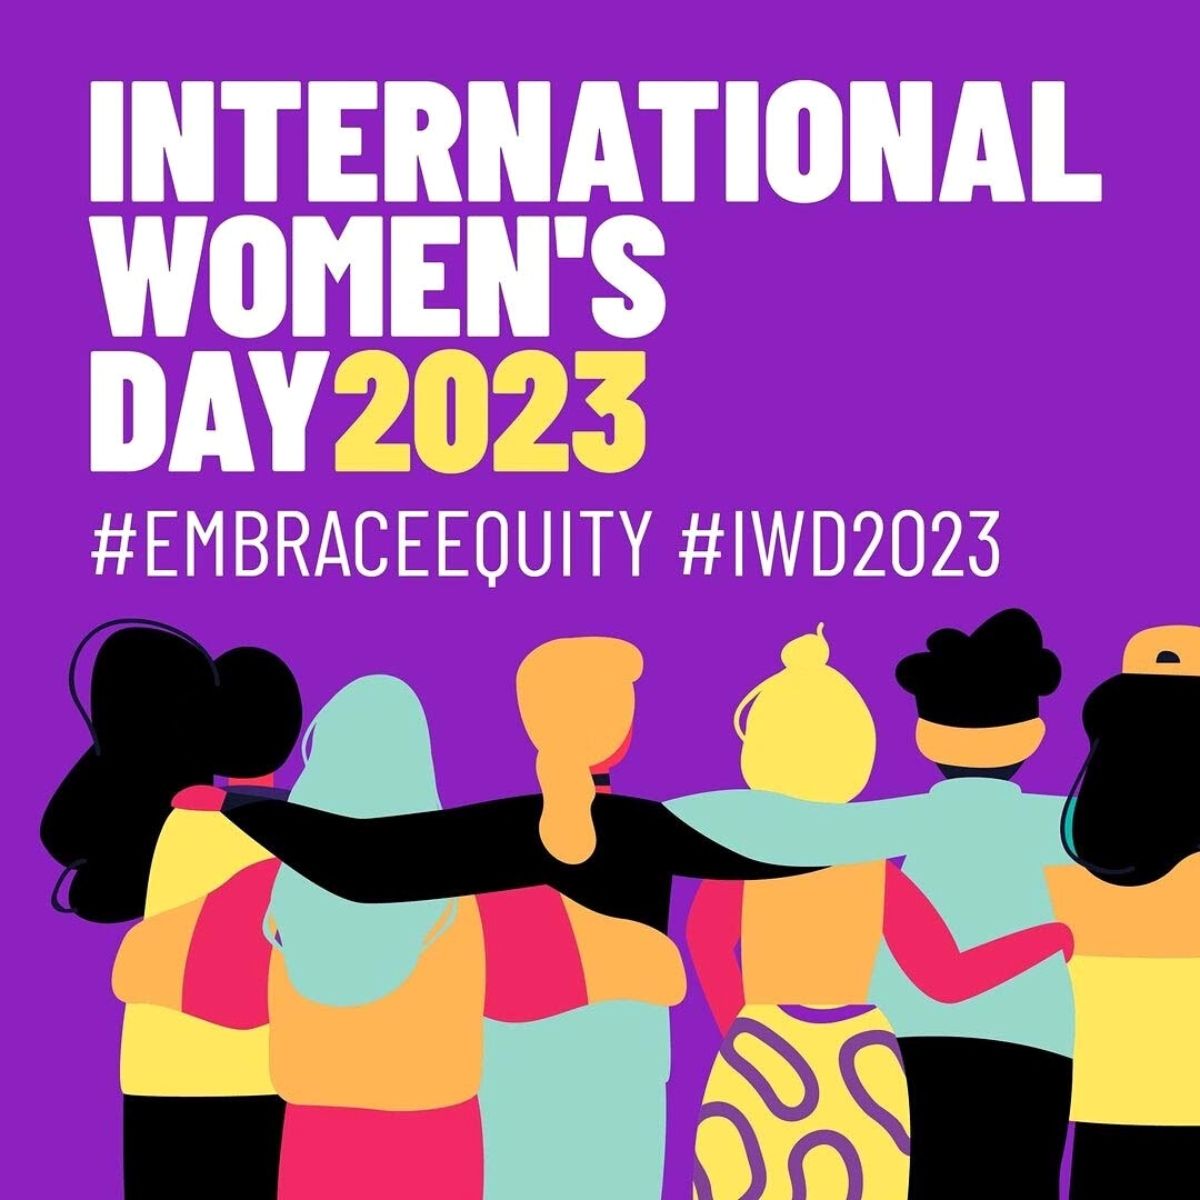 Embrace Equity theme of IWD 2023